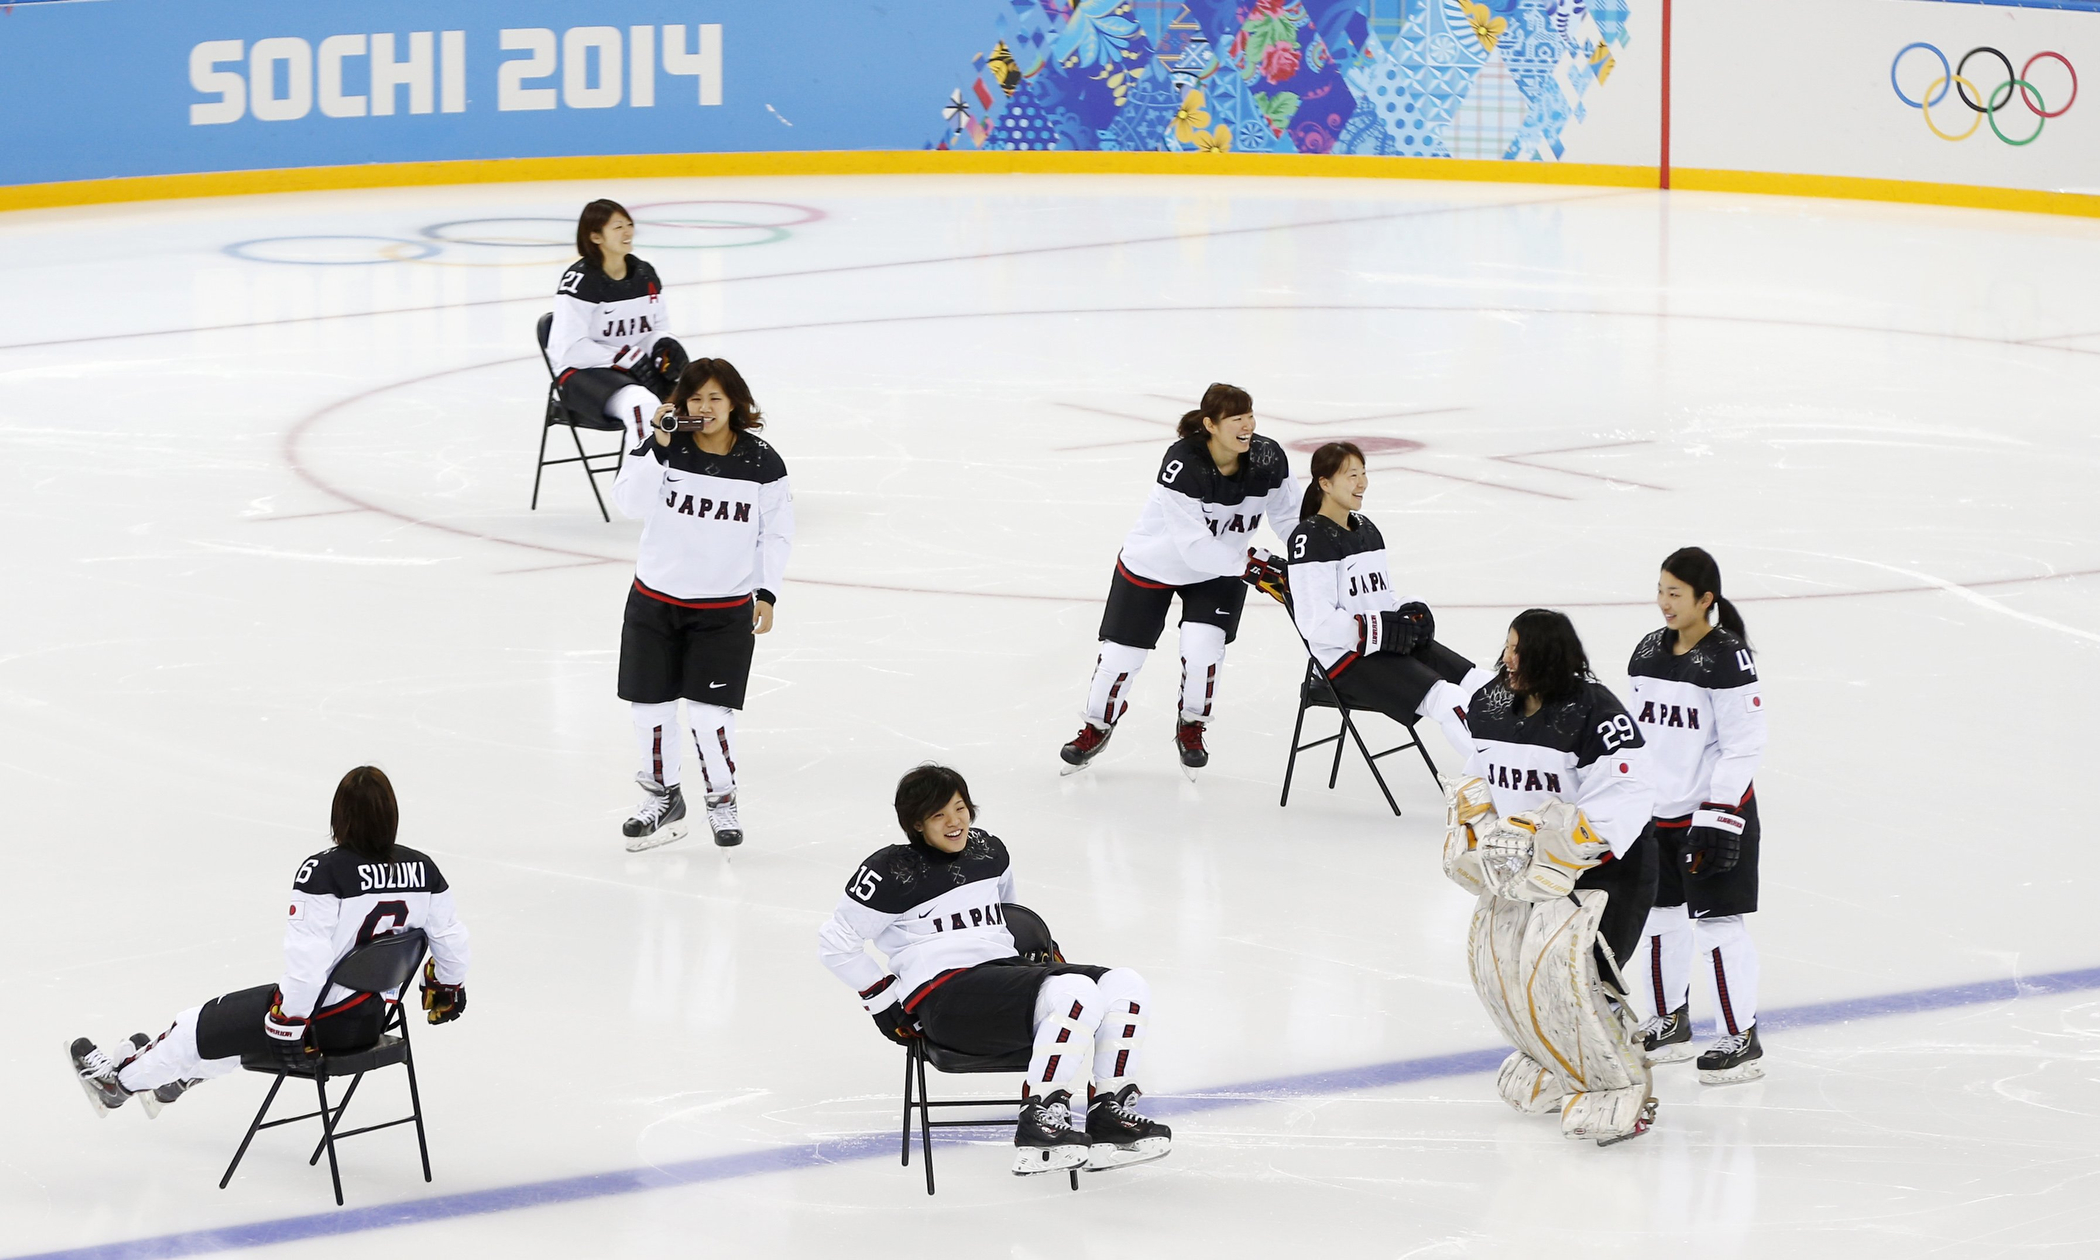 Players of Japan women's ice hockey team slide on chairs prior their practice session ahead of the 2014 Winter Olympics, Thursday, Feb. 6, 2014, in Sochi, Russia.